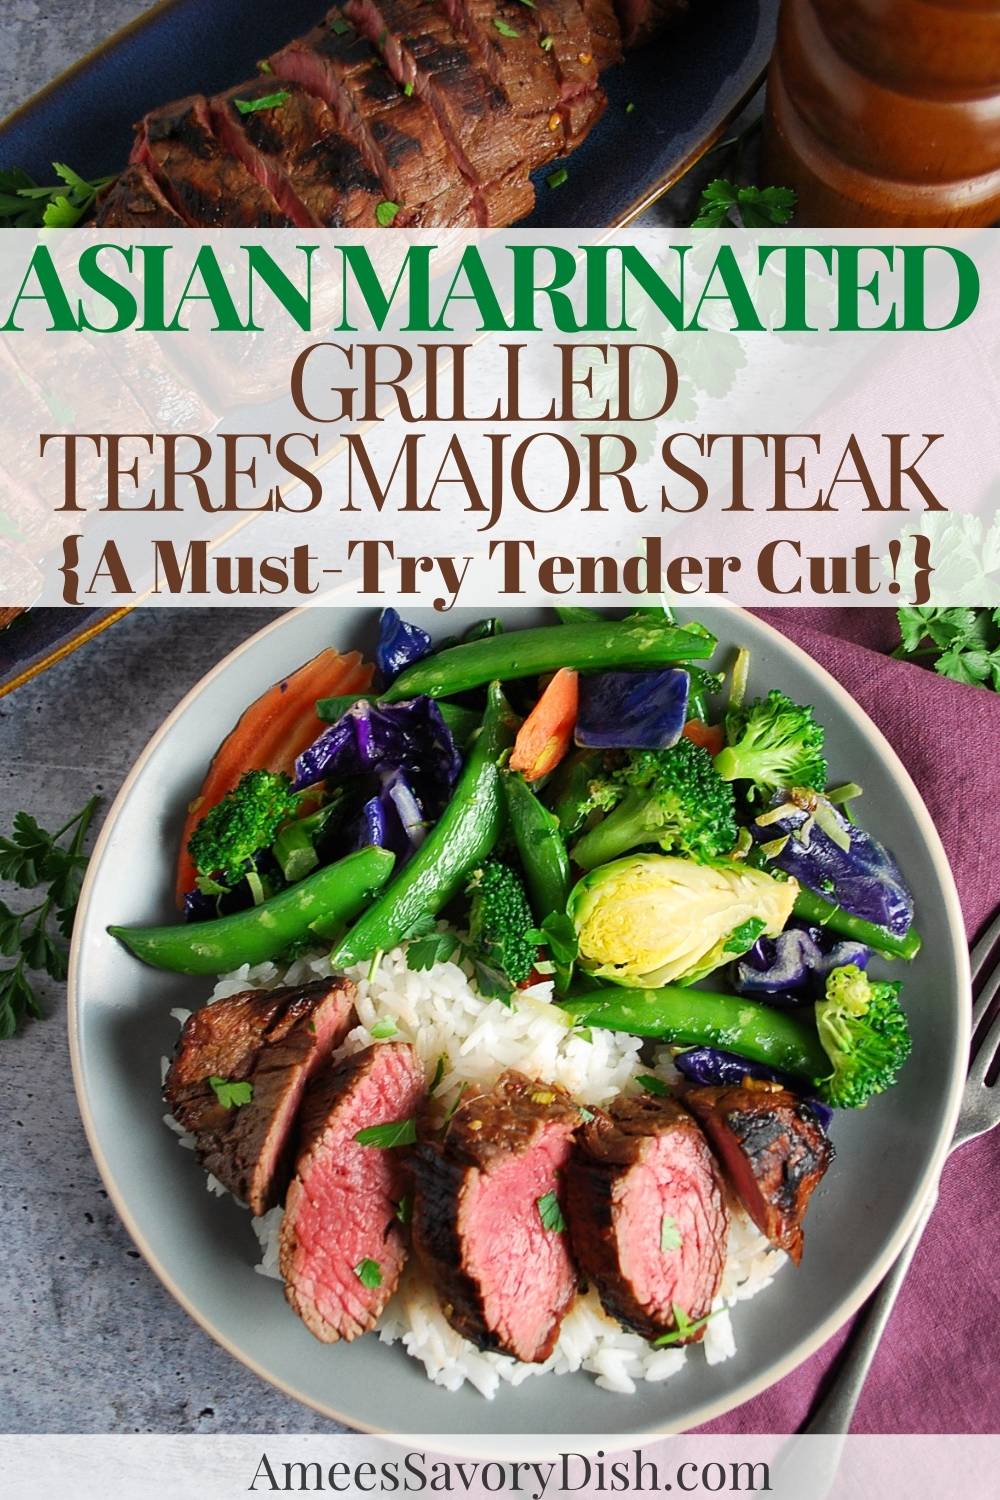 #Ad Tender Teres Major Steak, aka Petite Tender Steak, is infused with an easy Asian marinade and grilled to perfection for a simple restaurant-worthy meal. If you’ve never prepared this cut of beef, you need to put it on your must-try list! #BeefFarmersandRanchers #FitFebruary via @Ameessavorydish